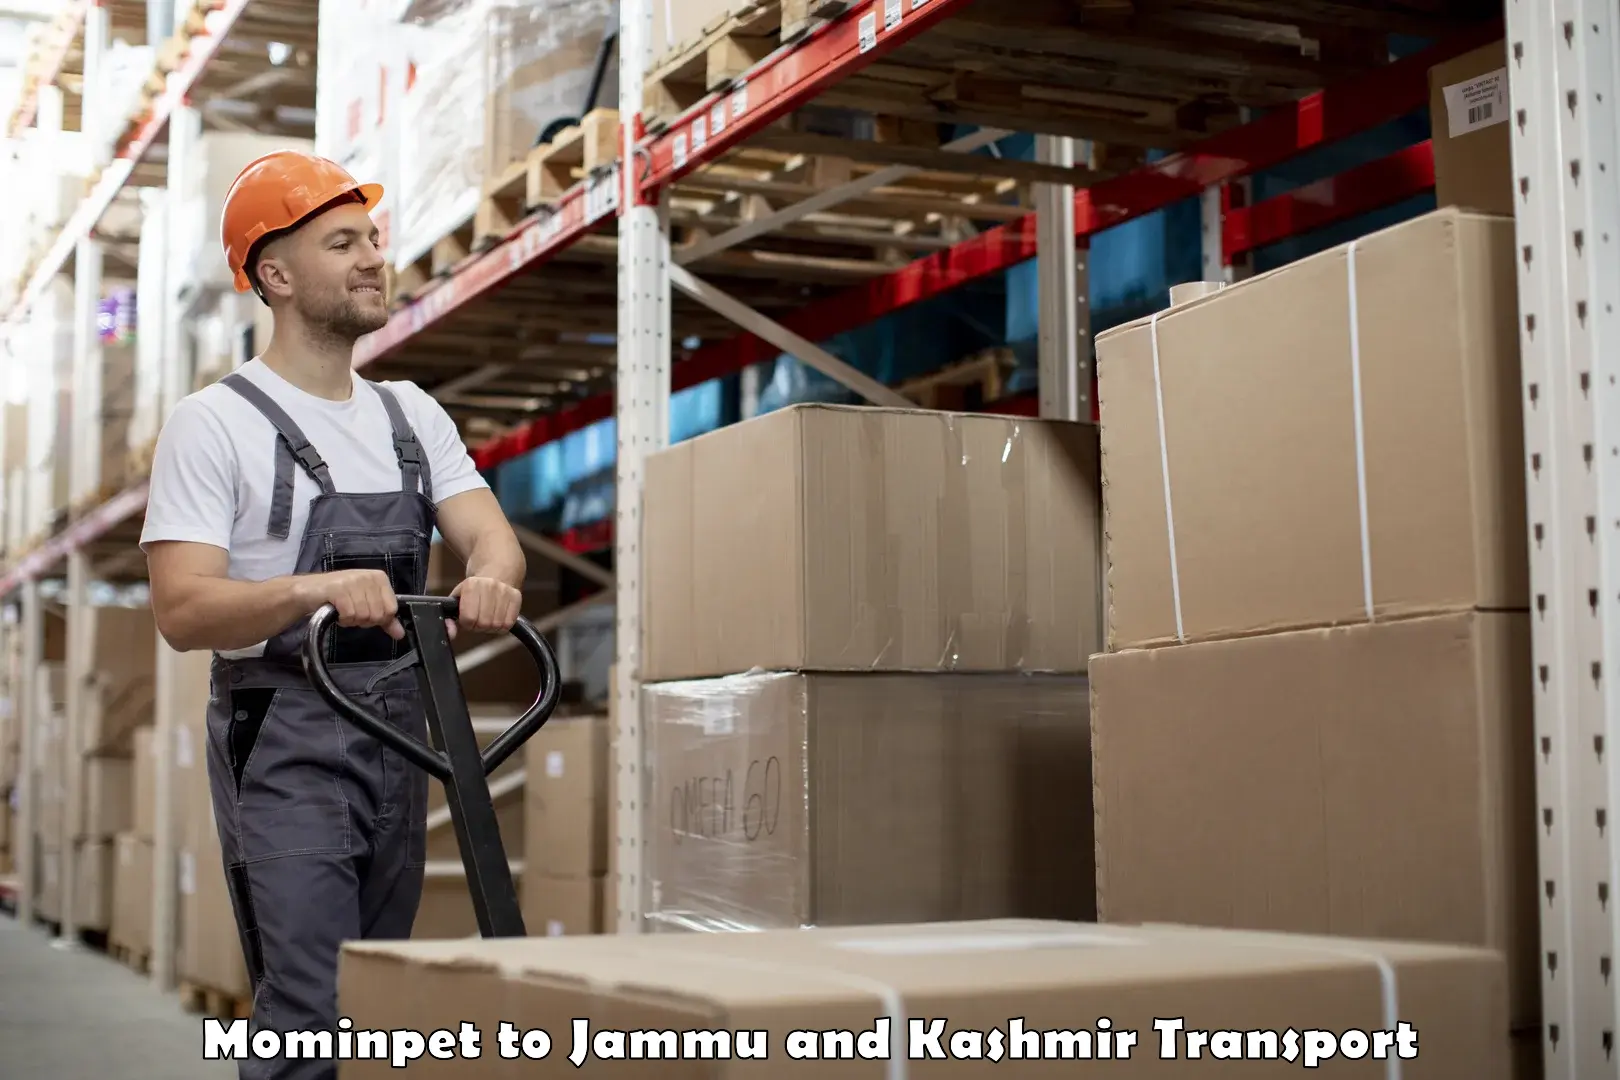 Cargo train transport services Mominpet to Jammu and Kashmir